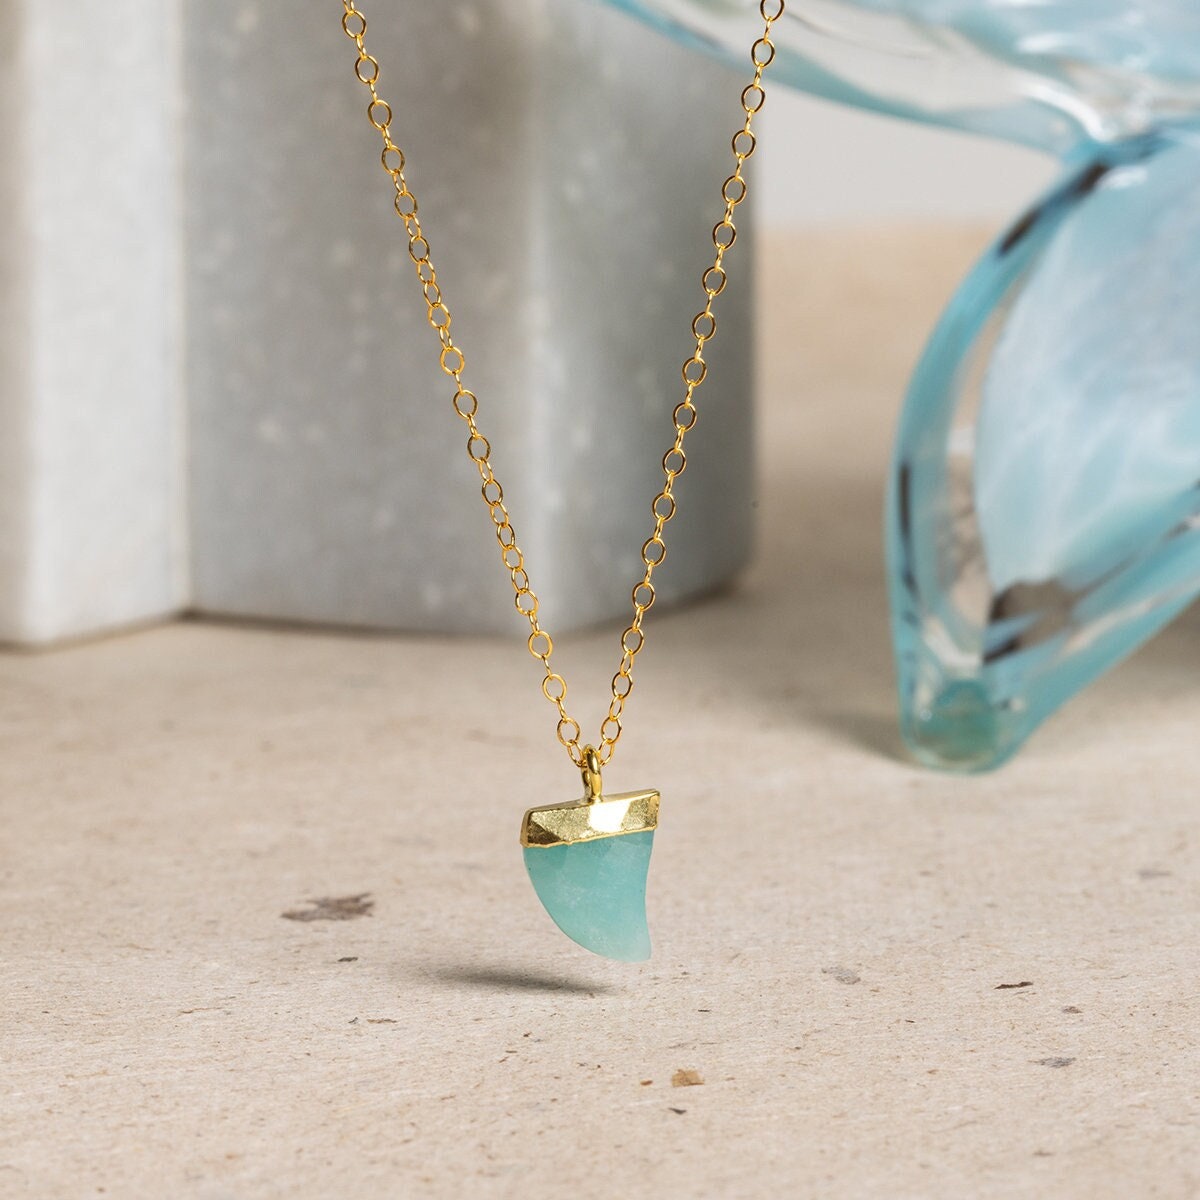 Amazonite Horn Charm Pendant Necklace on 14k Gold Filled Dainty Chain Necklaces Soul & Little Rose   